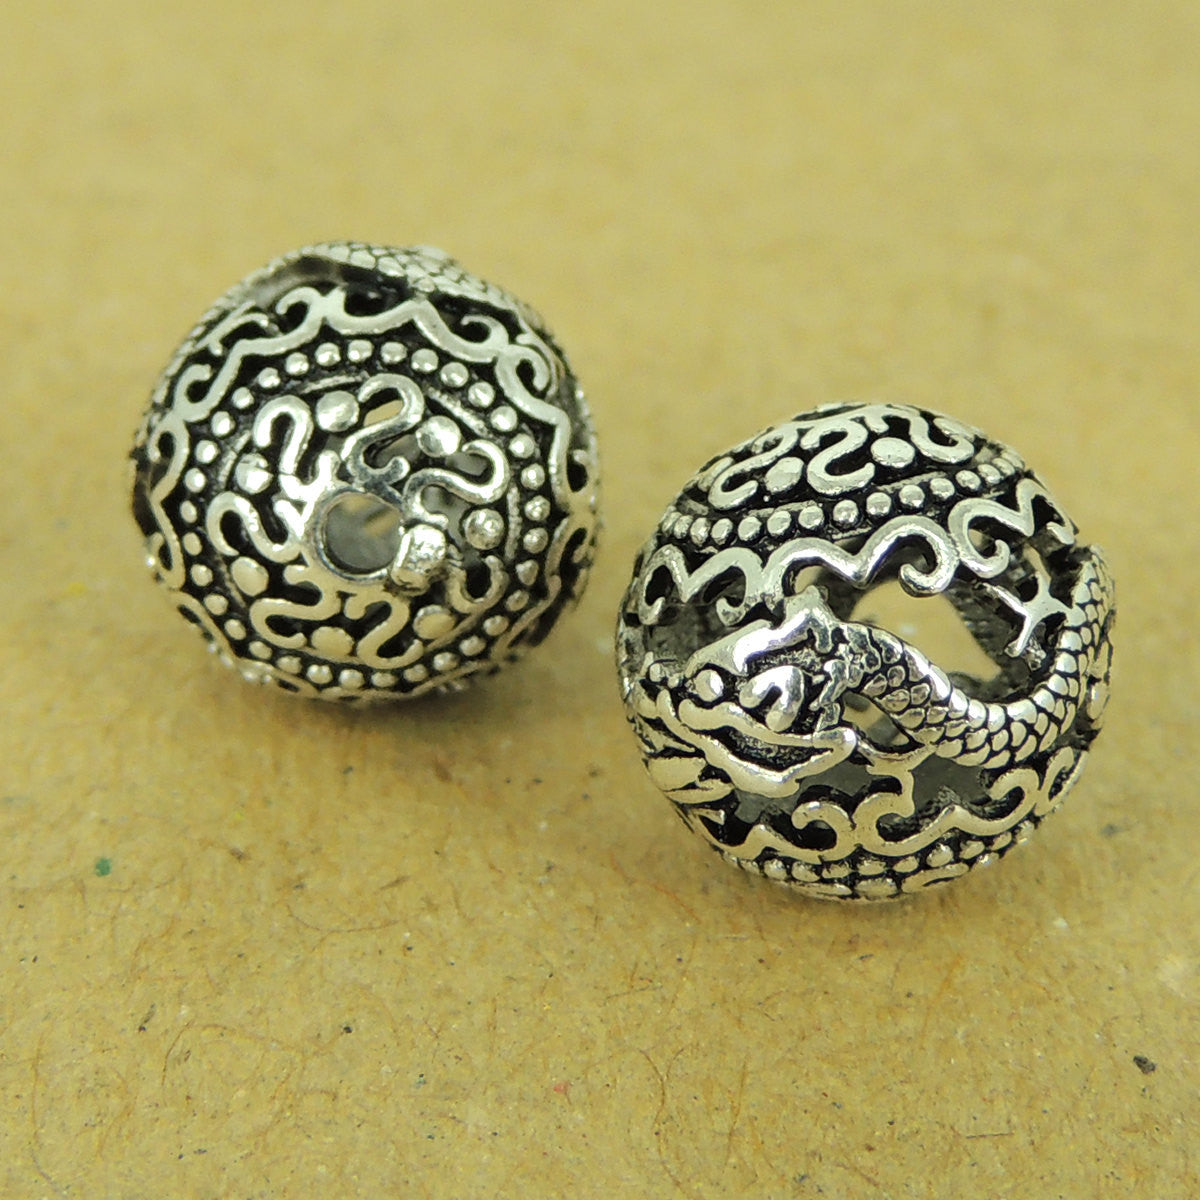 2 PCS Dragon & Cloud Protection 11mm Beads - S925 Sterling Silver WSP450X2